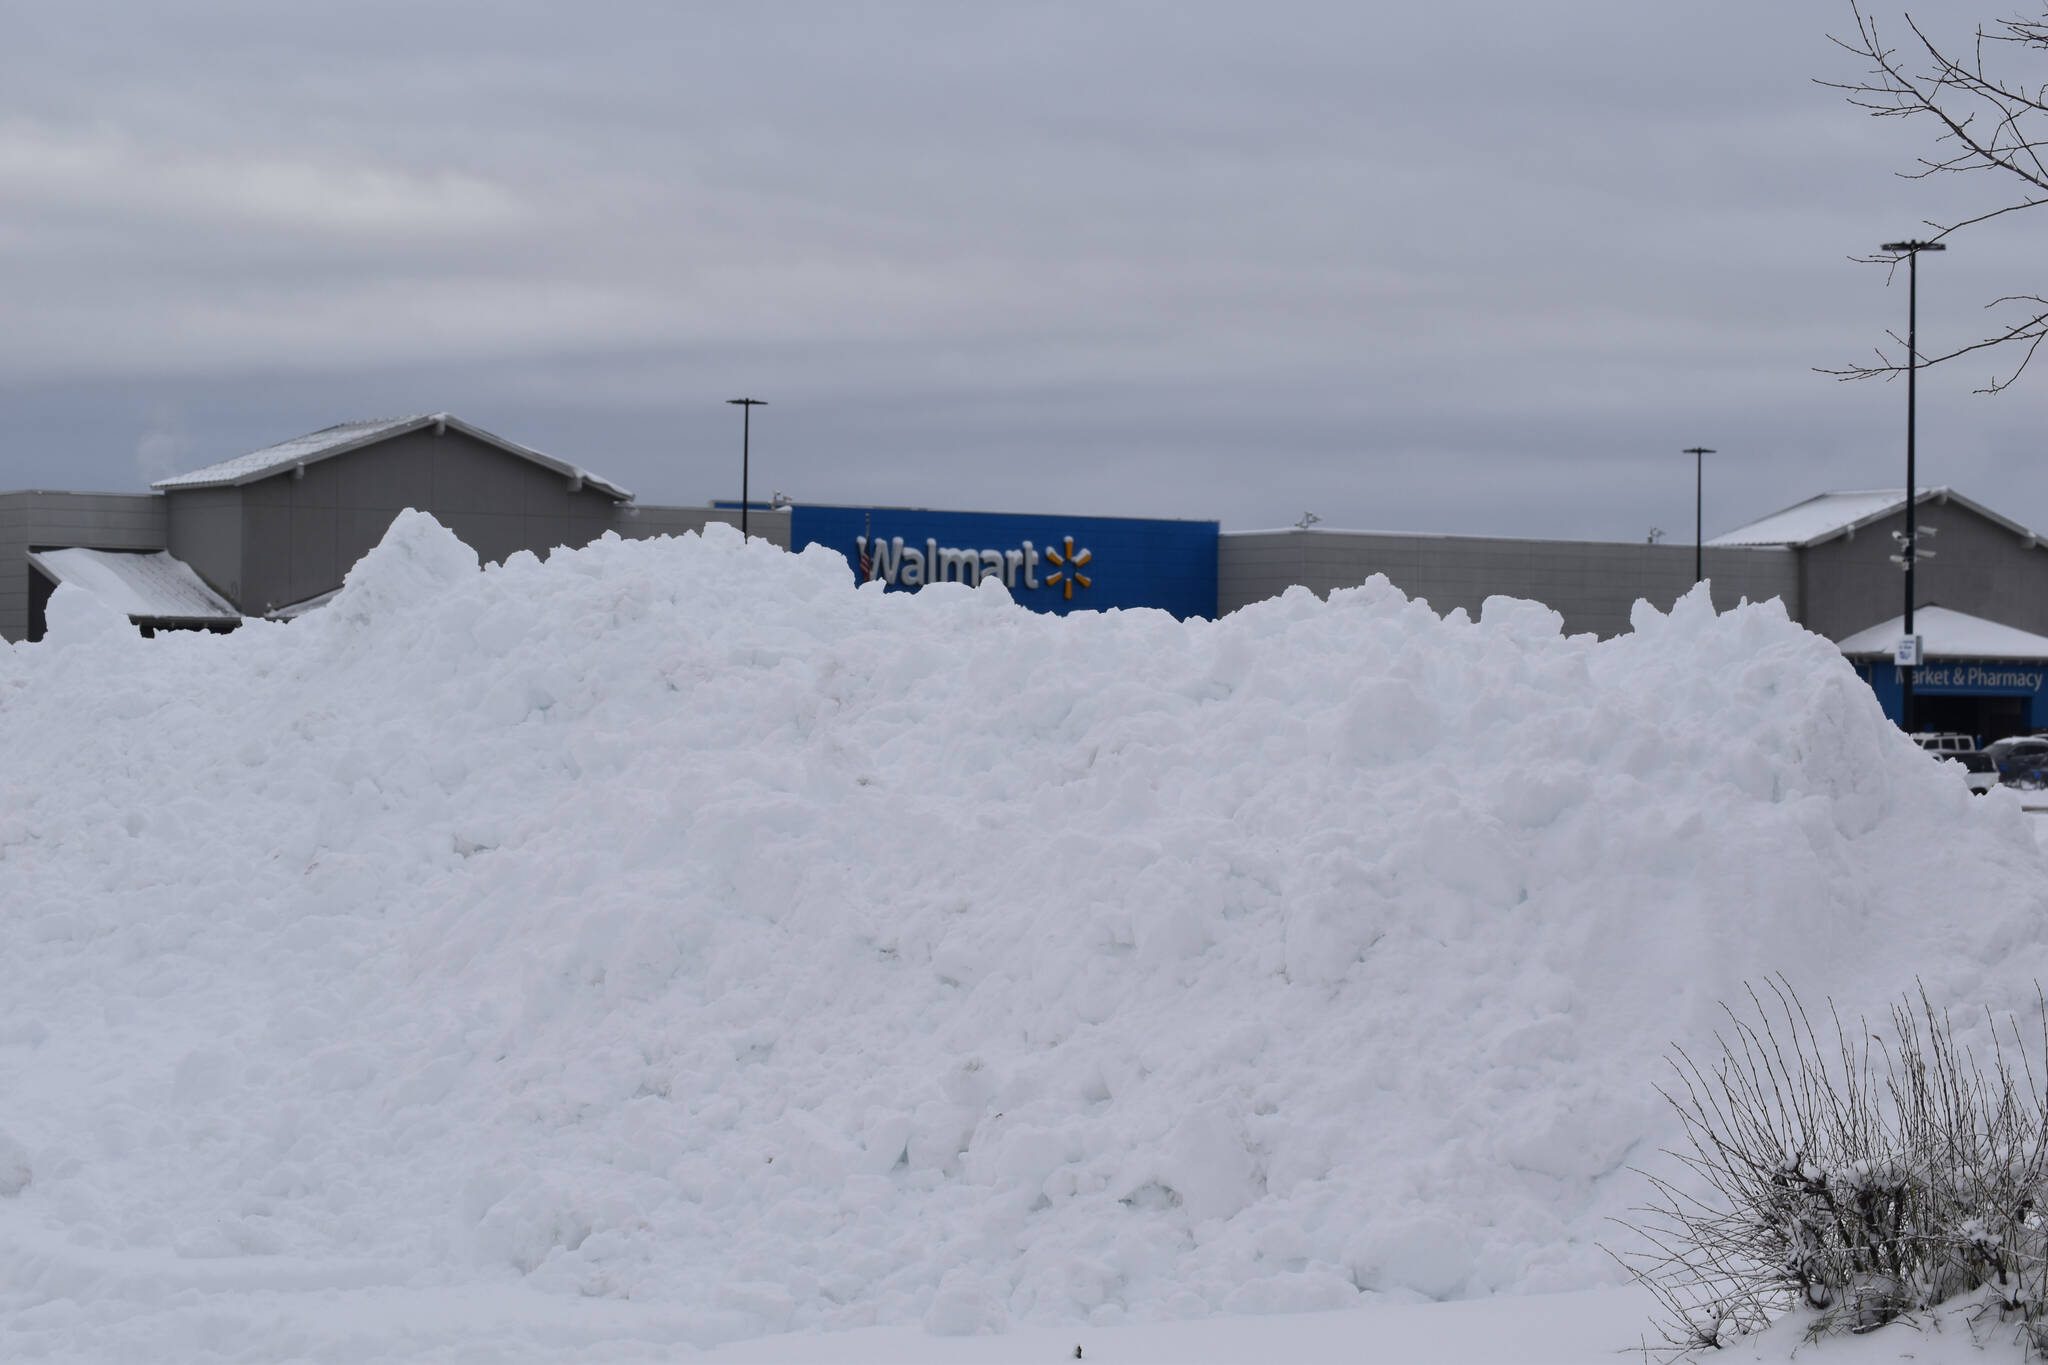 A pile of snow is seen in the Walmart parking lot on Wednesday, Oct. 26, 2022. (Jake Dye/Peninsula Clarion)